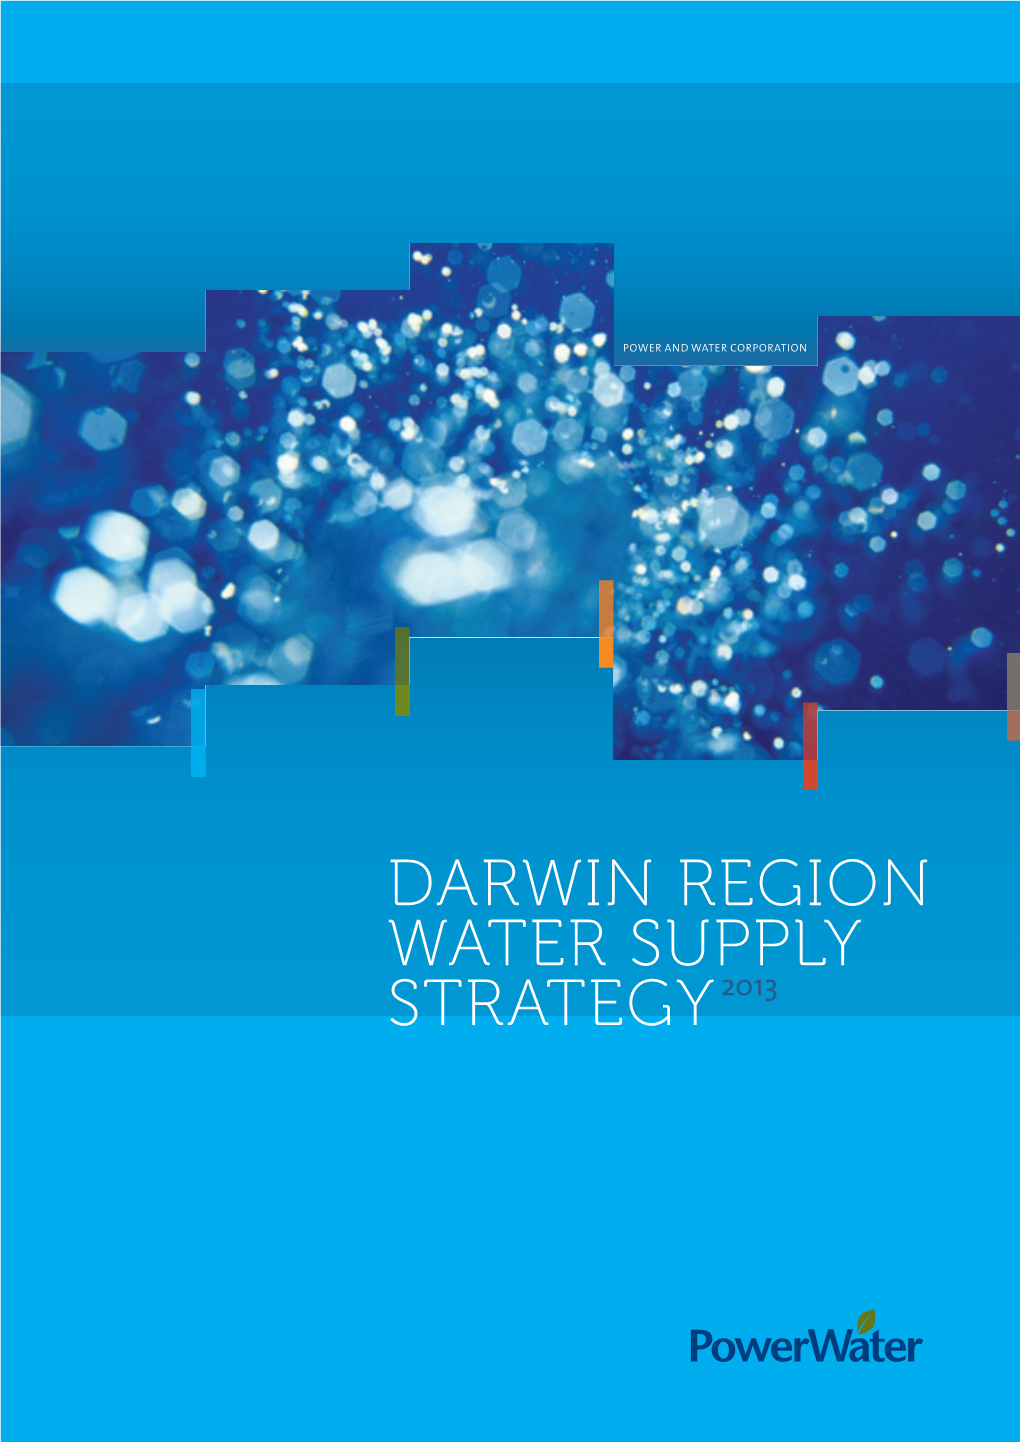 2013 Power and Water Corporation Darwin Region Water Supply Strategy